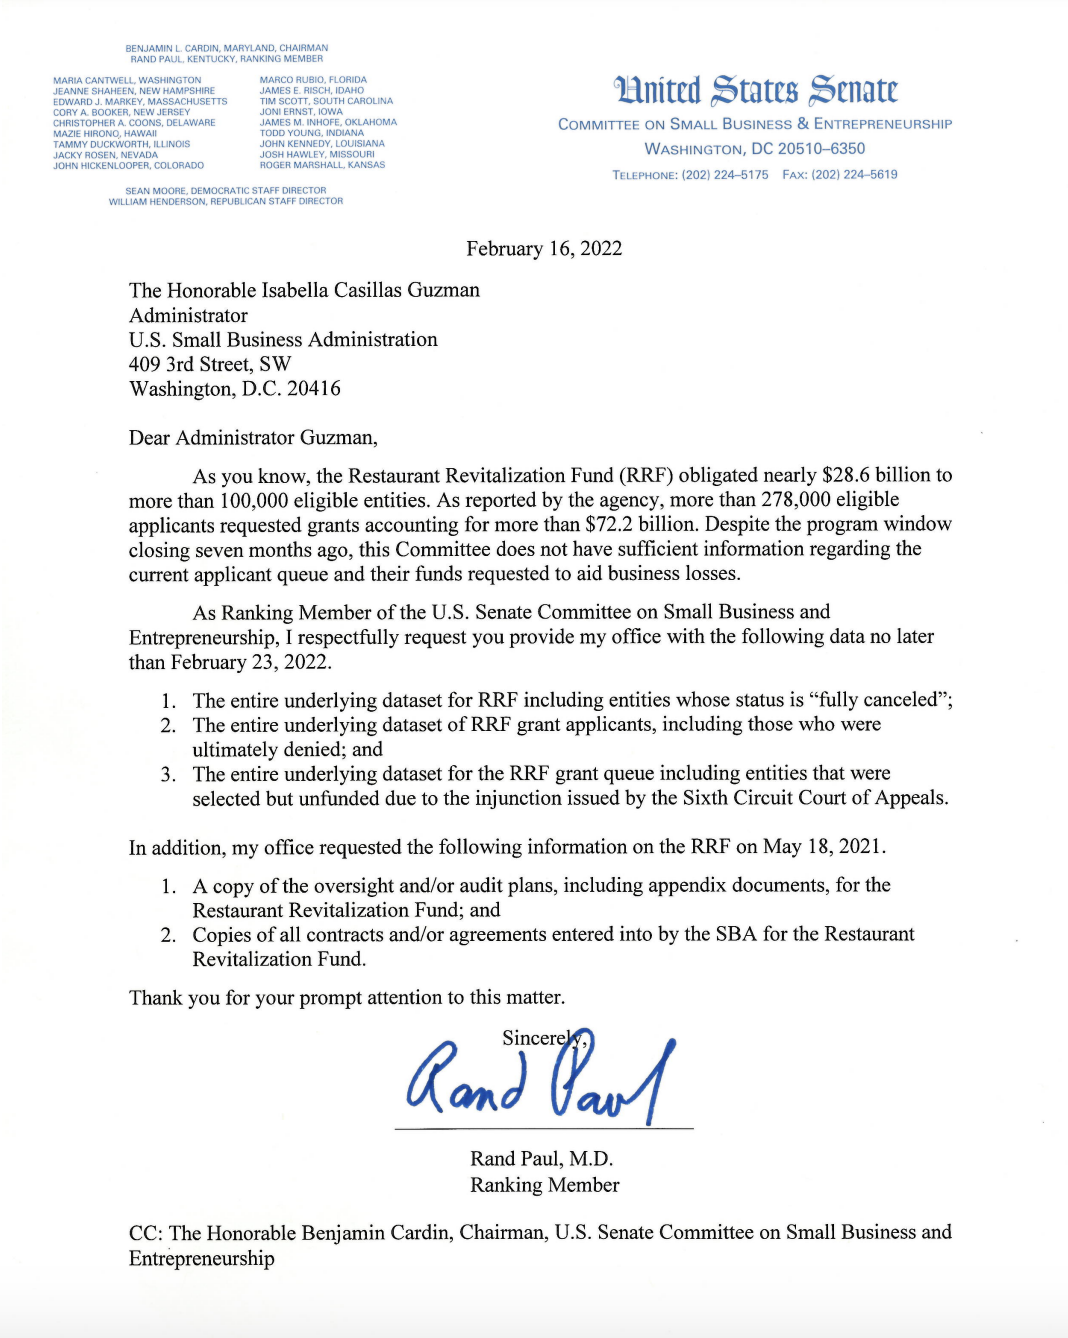 Senator Rand Paul's letter to the Small Business Administration